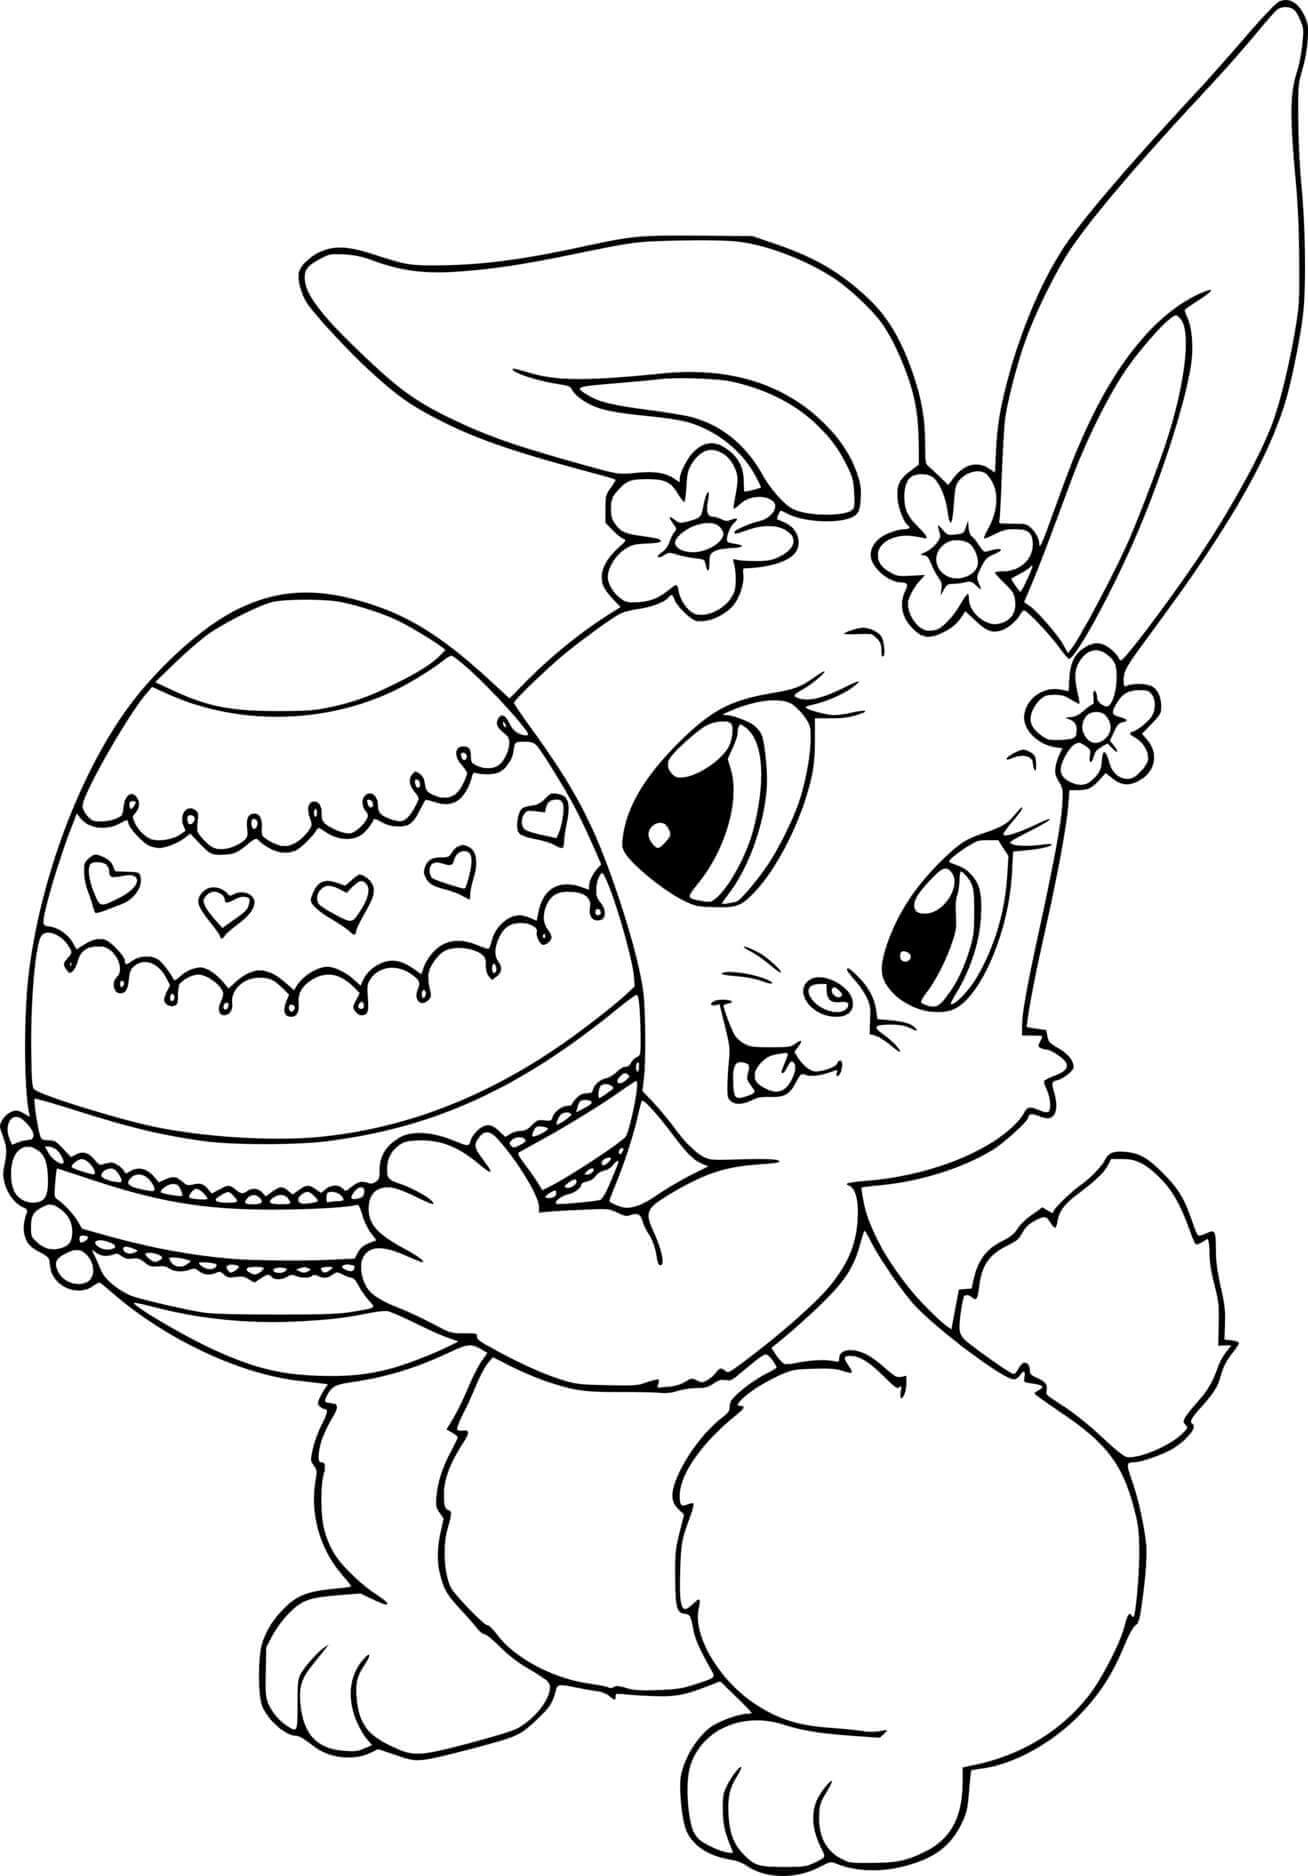 Easter Bunny With Flowers On Her Head Coloring Page